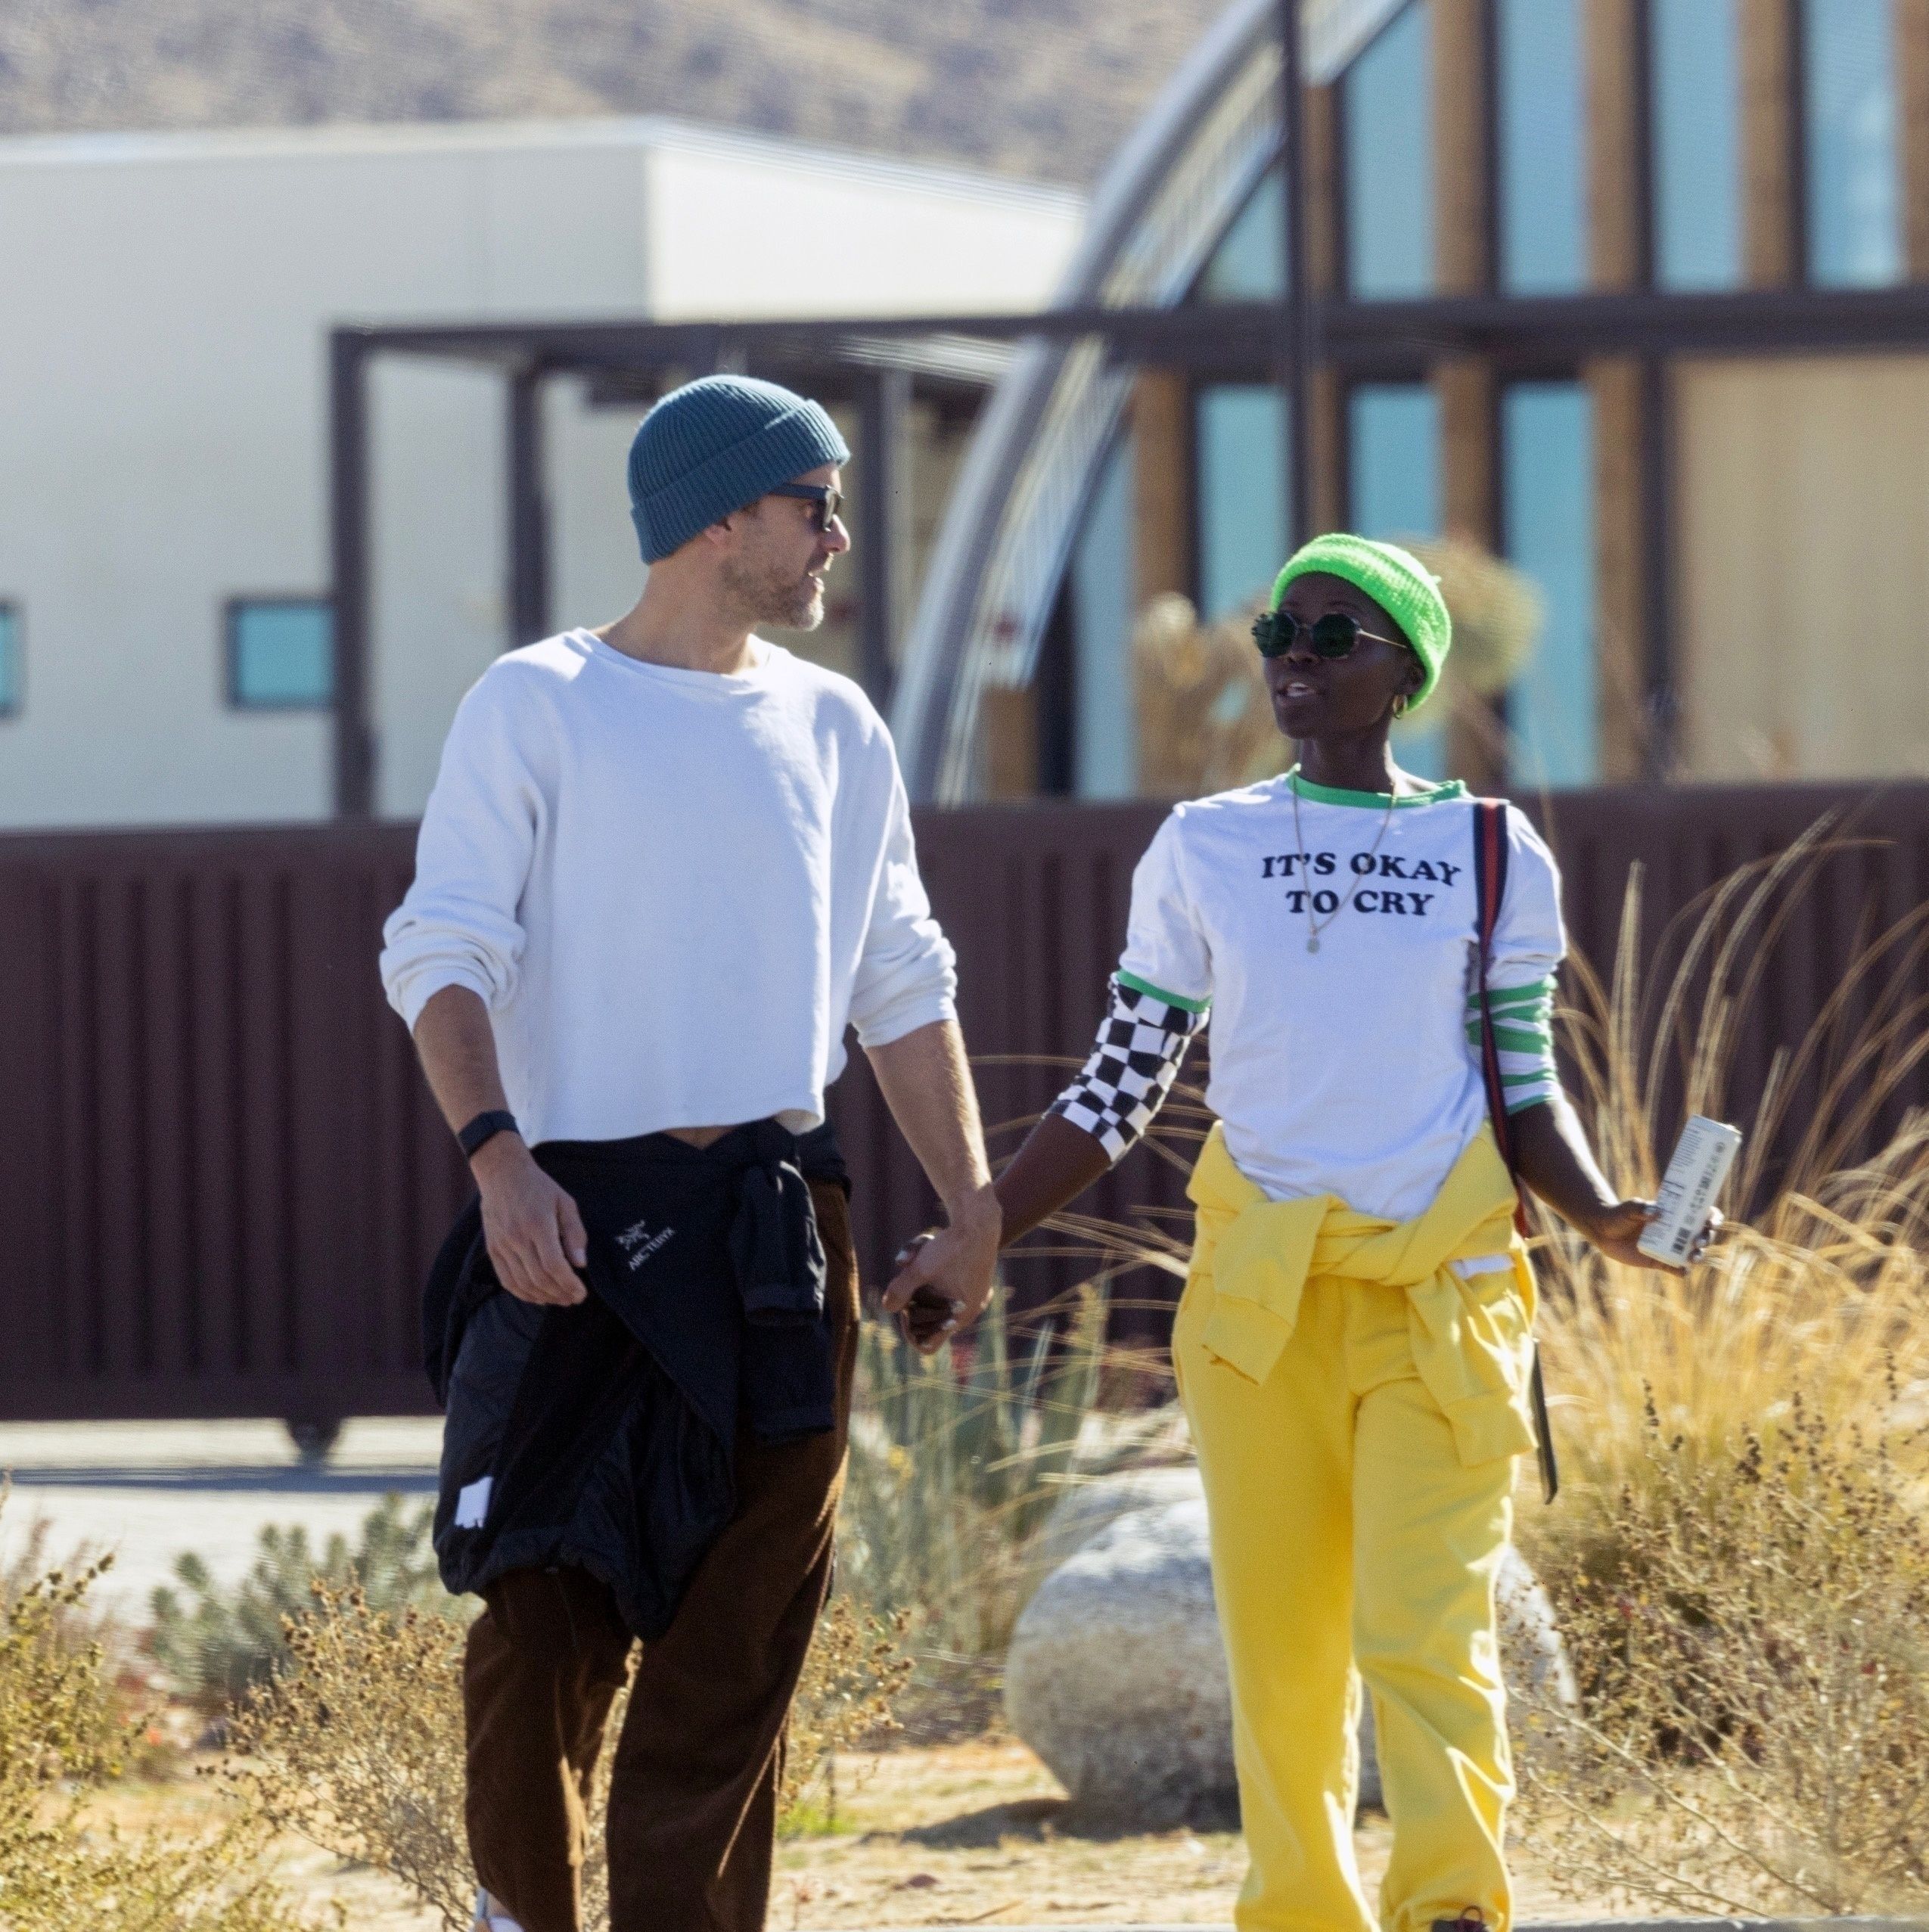 Joshua Jackson and Lupita Nyong'o Confirm They're Dating With PDA-Filled Outing